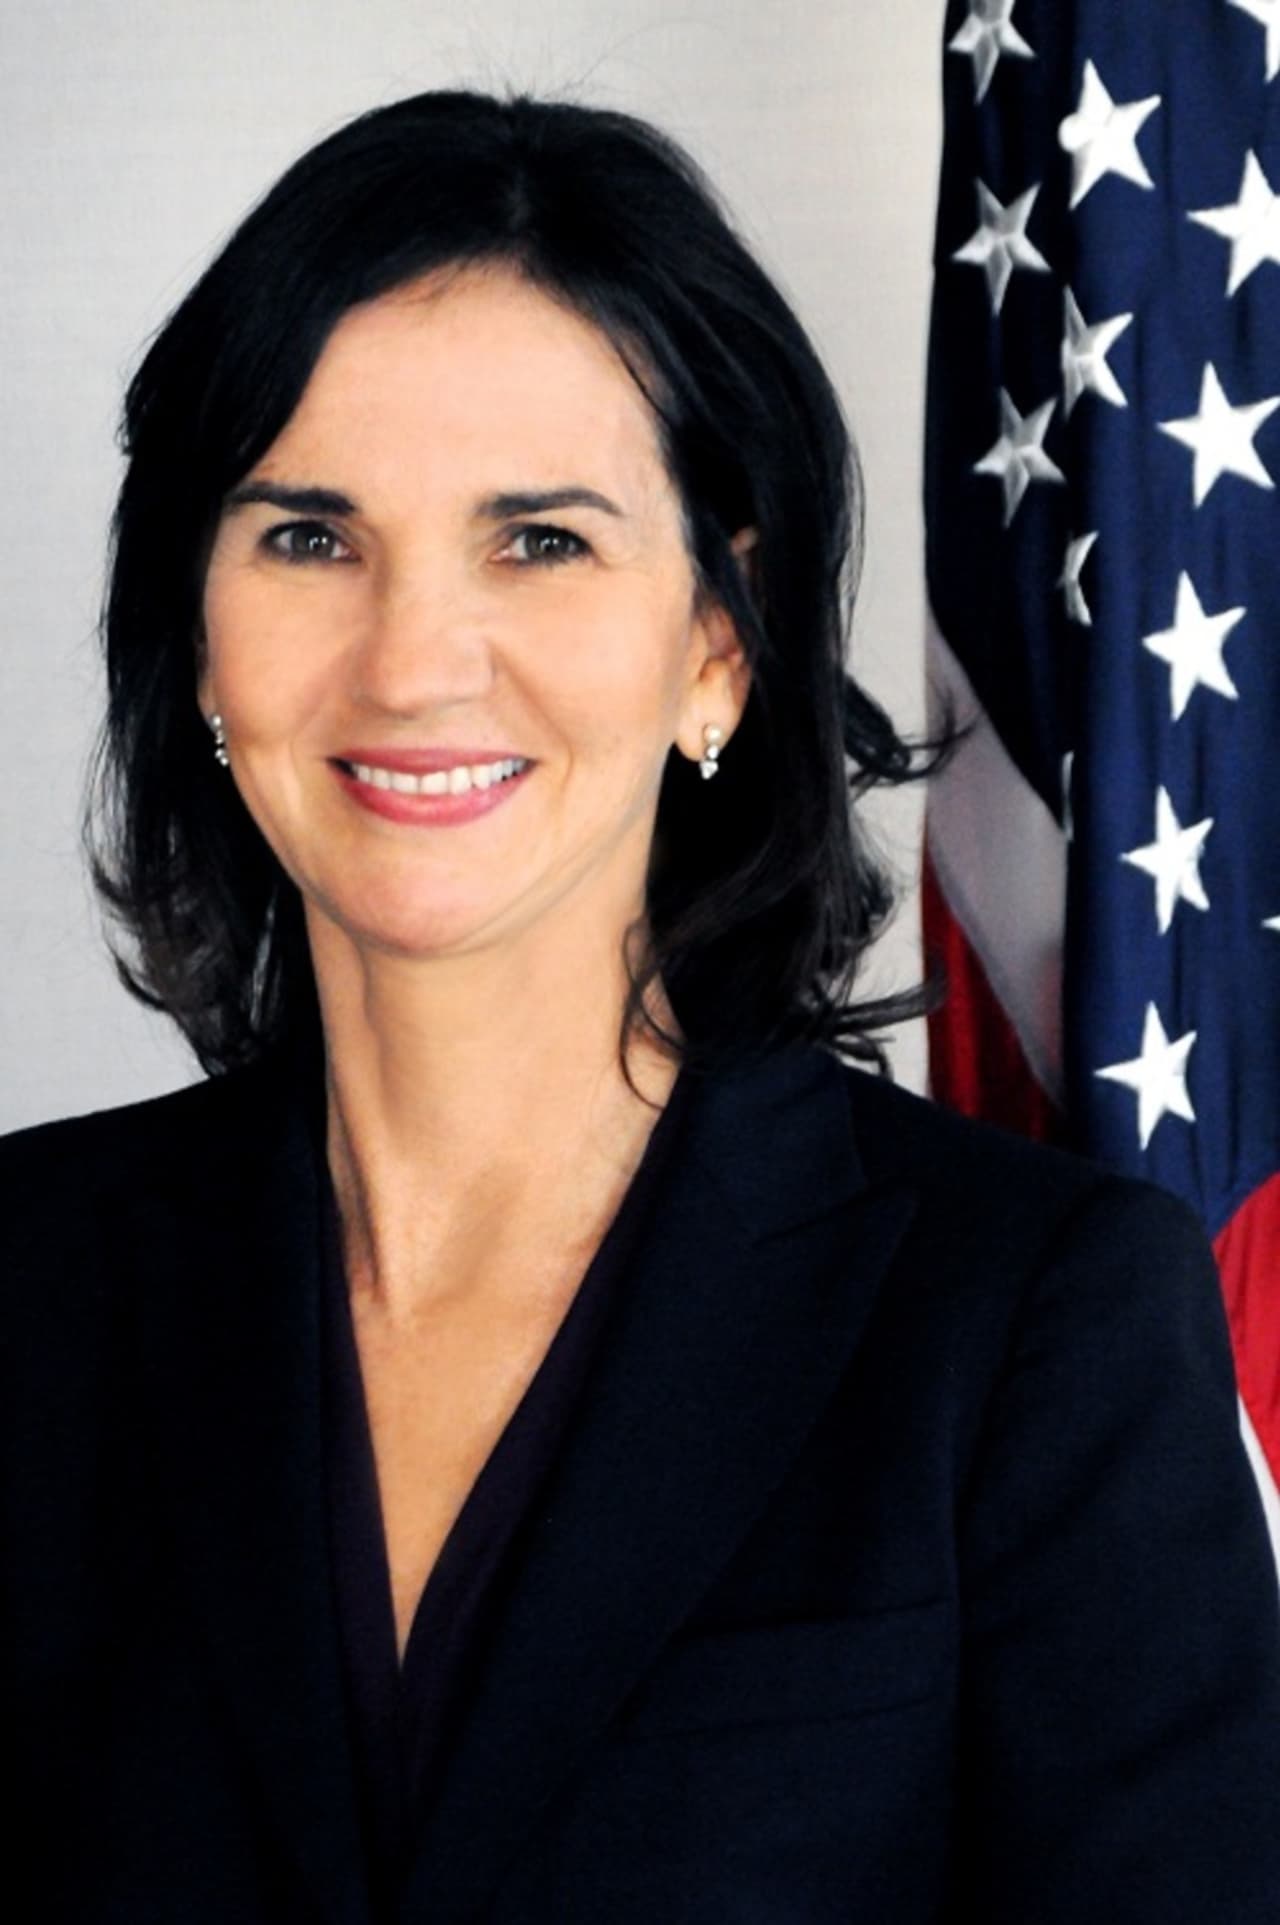 U.S. Attorney for Connecticut Deirdre Daly